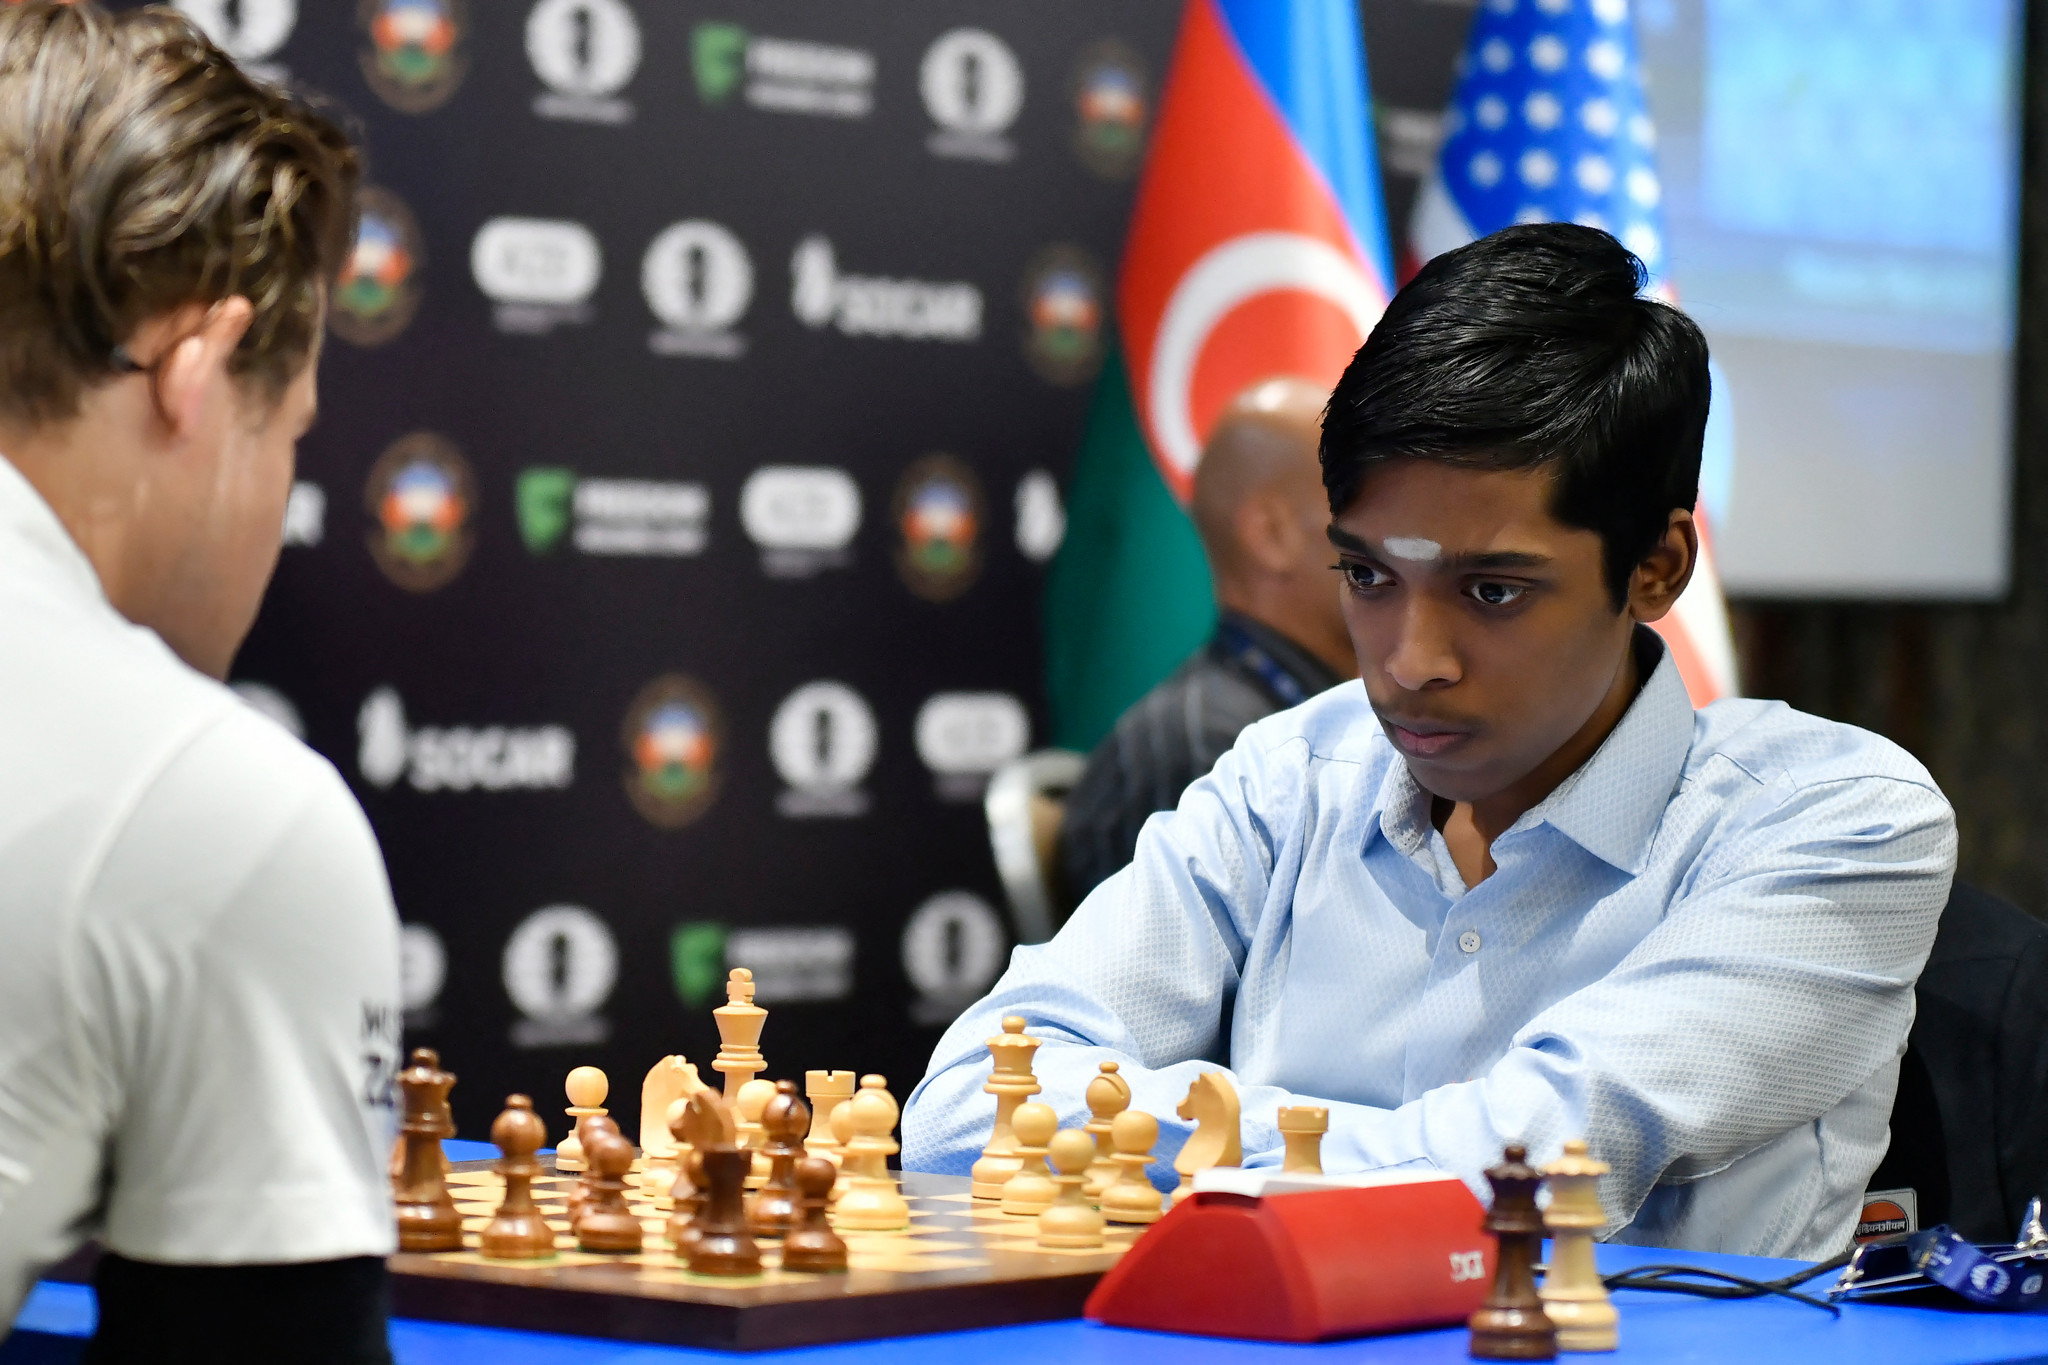 India's Rameshbabu Praggnanandhaa (R) competes against Norway's Magnus Carlsen (L) during the final at the FIDE Chess World Cup in Baku on August 24, 2023. (Photo by Tofik BABAYEV / AFP)